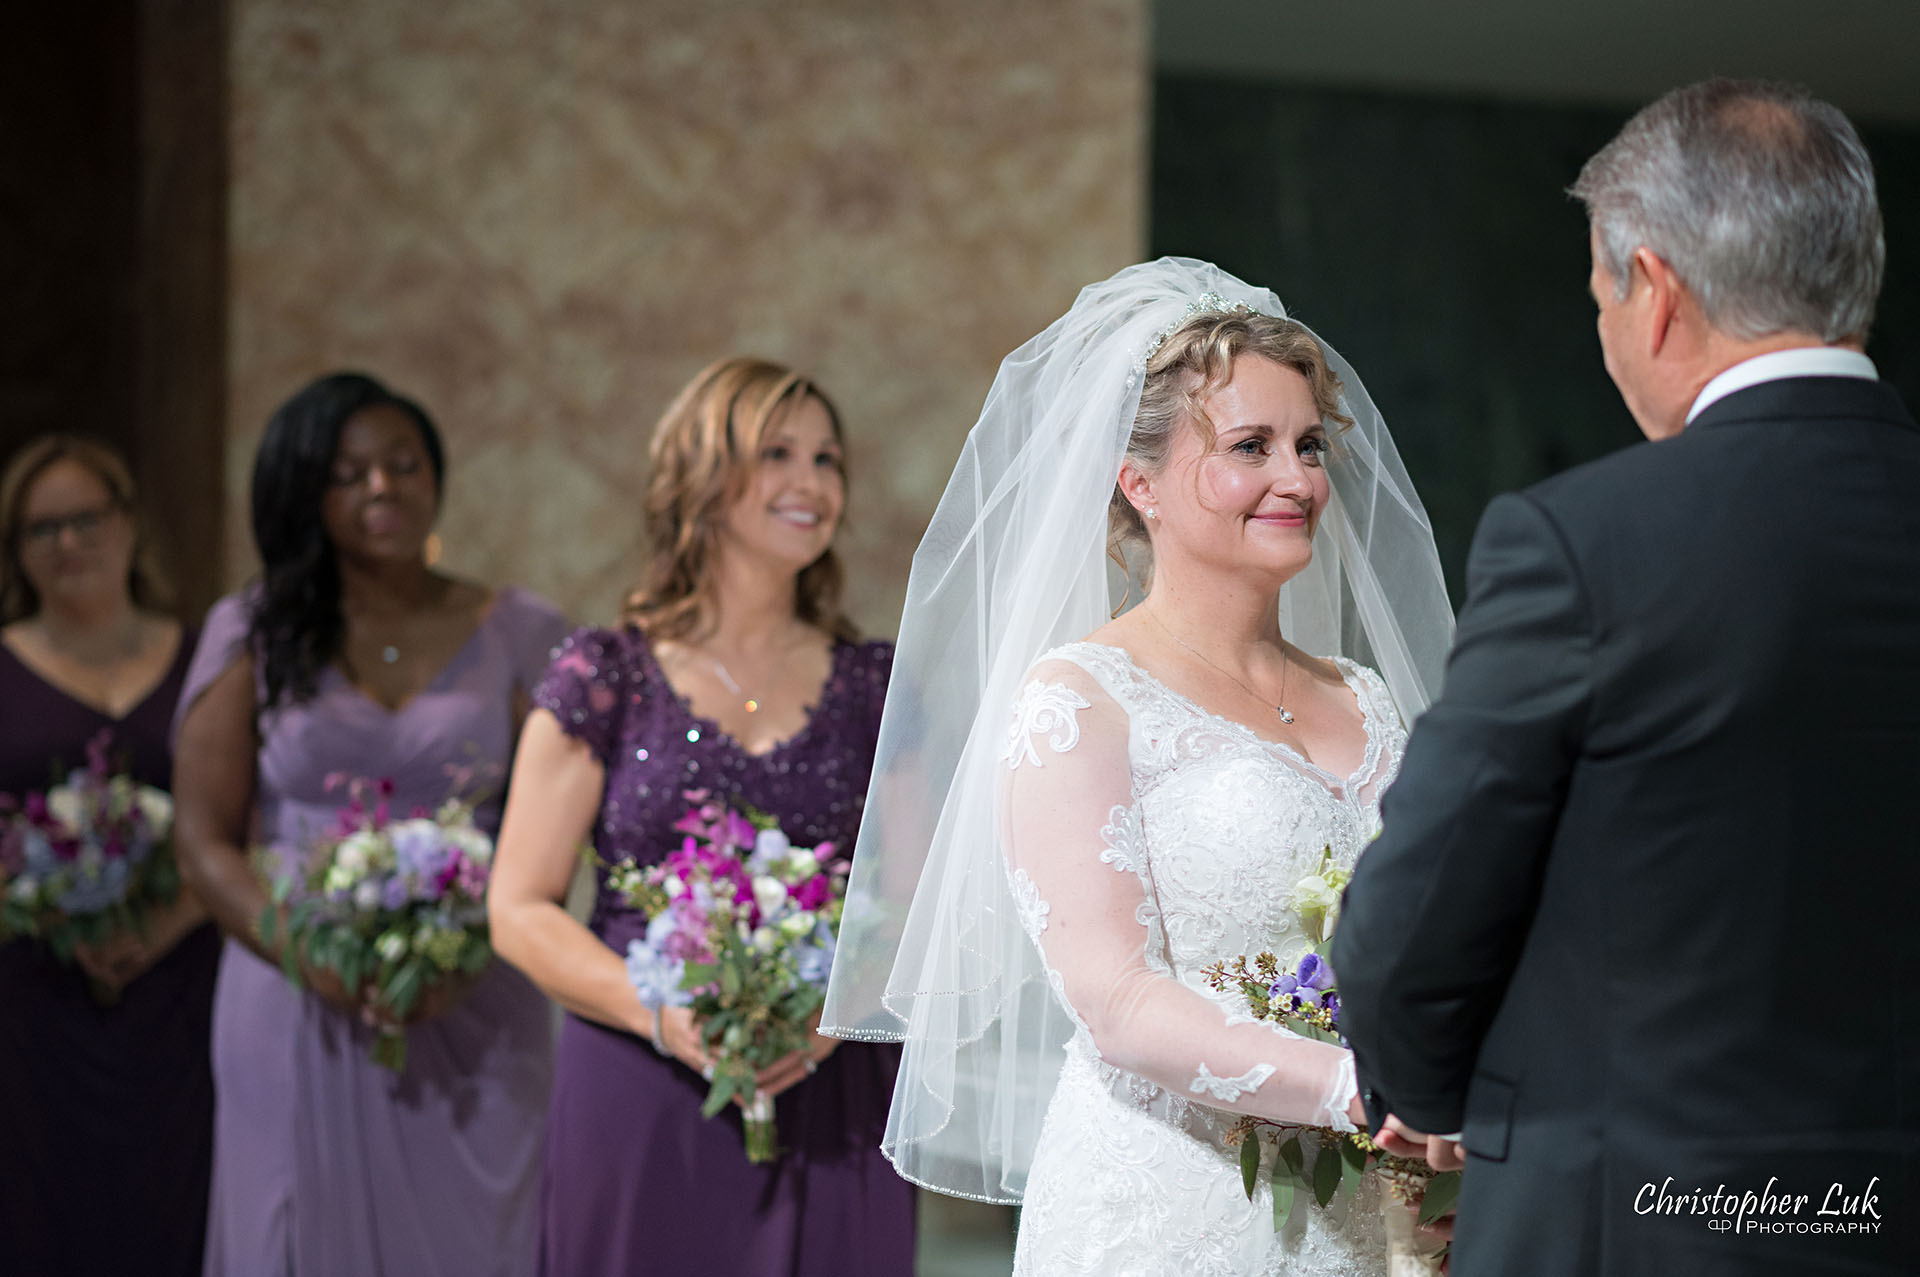 Christopher Luk Toronto Wedding Photographer Natural Candid Photojournalistic Tyndale Chapel Church Ceremony Bride Vows 